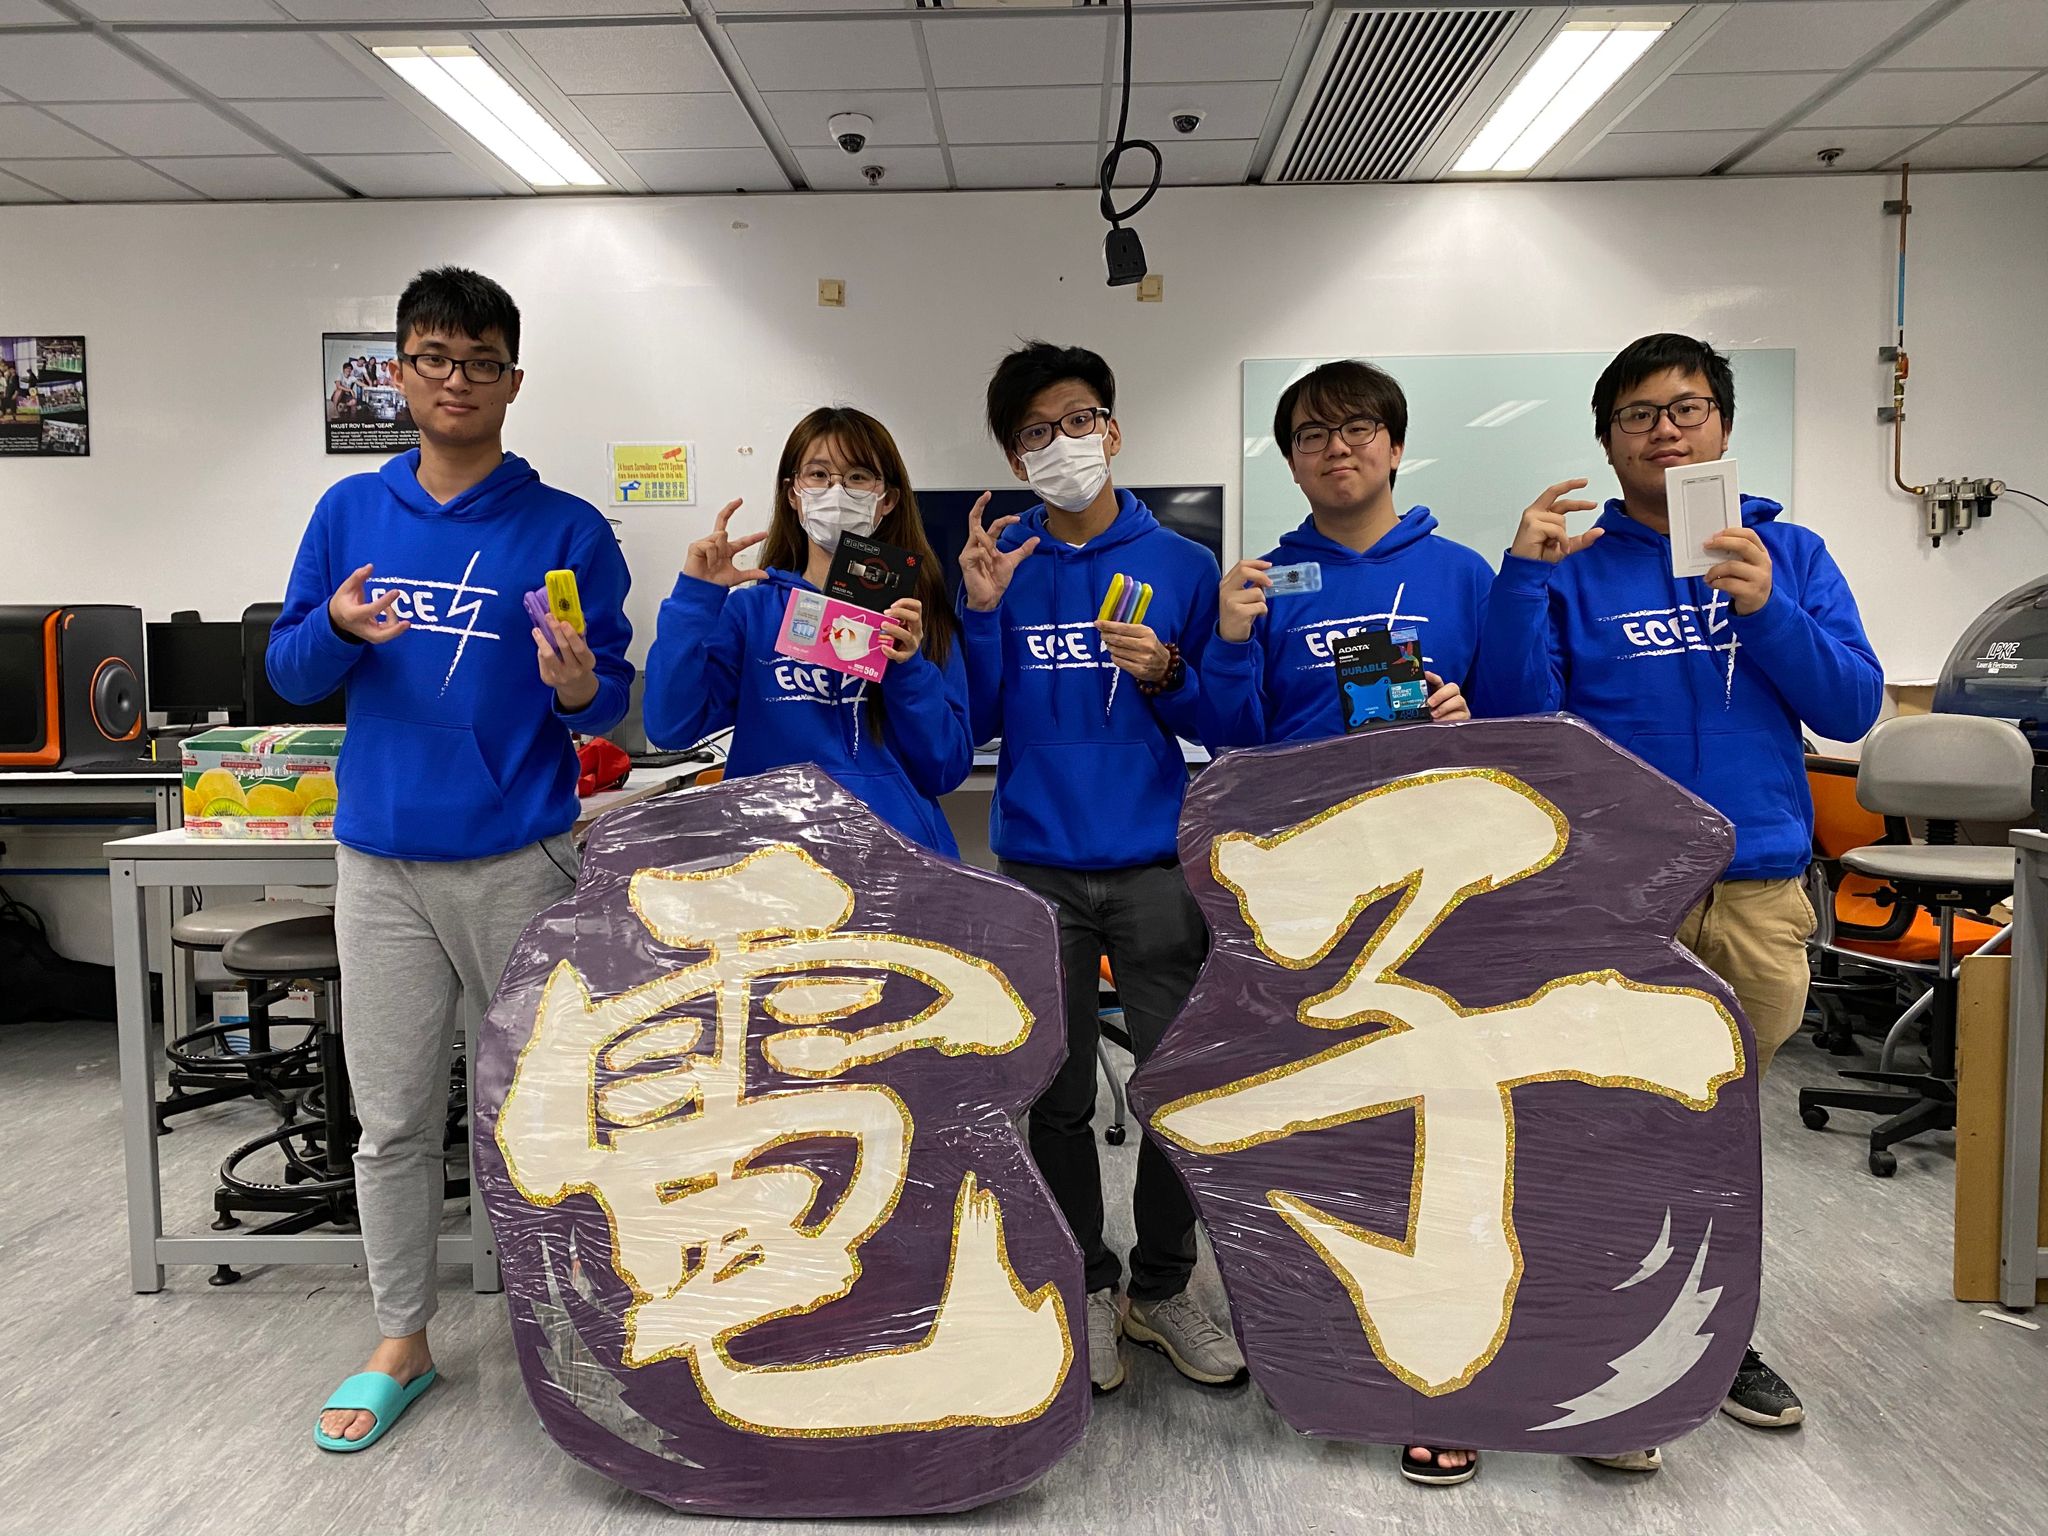 Terry (center) developed his leadership skills as Chairperson of the Electronic and Computer Engineering Students’ Society while still an undergraduate.